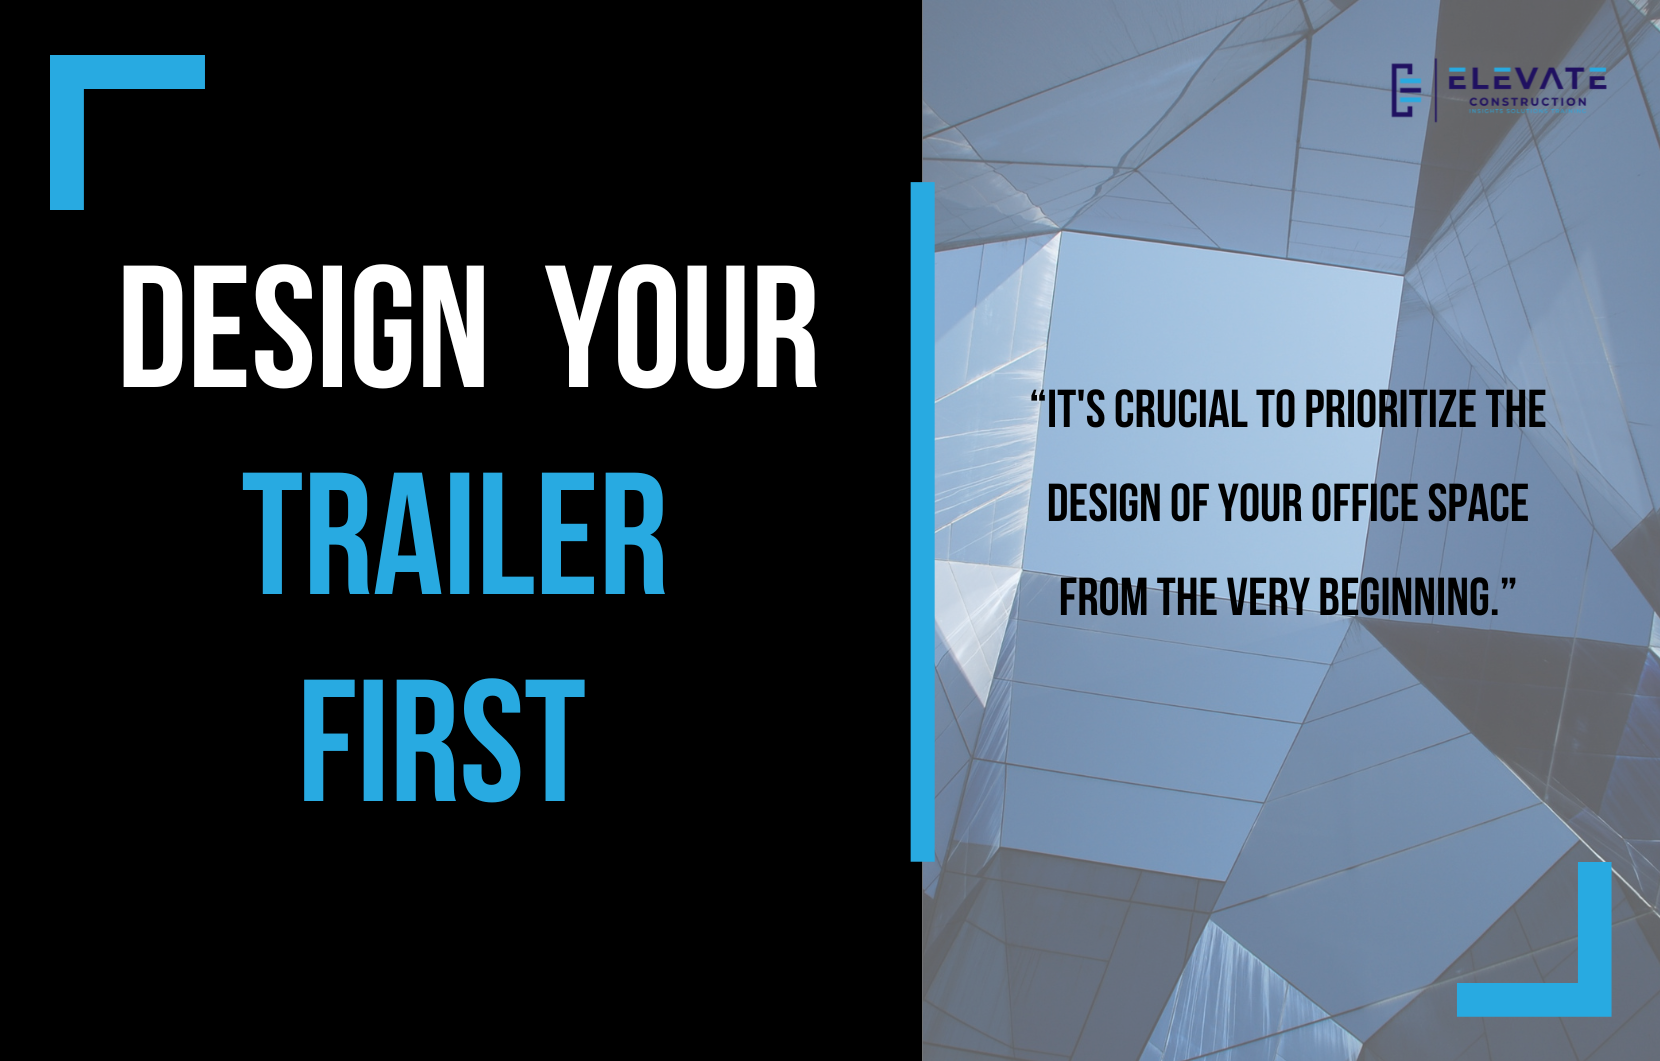 Design your trailer first